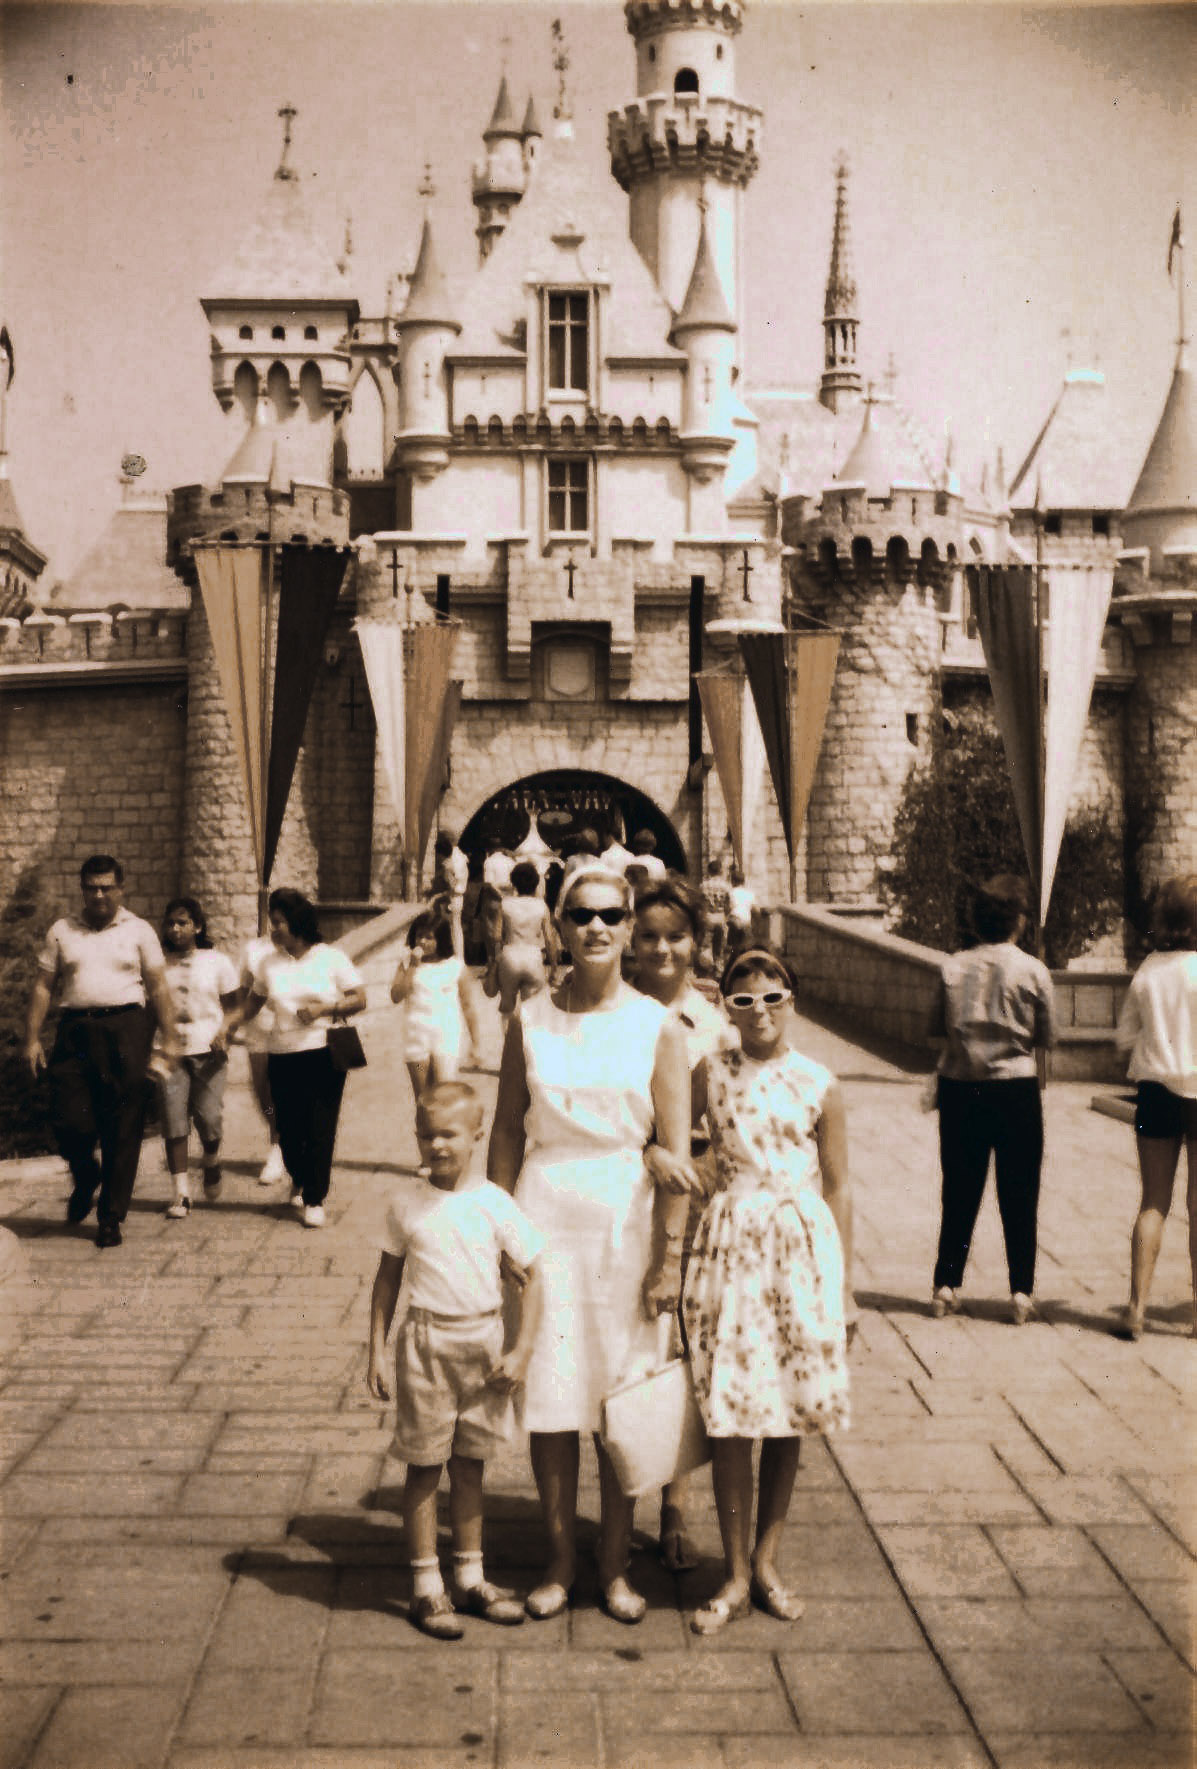 Here's a classic Disney/family picture from the  early 60's. Tom I'Anson family (L to R Mark, Marilyn, Cheryl, Maureen). Tom is taking the picture. View full size.